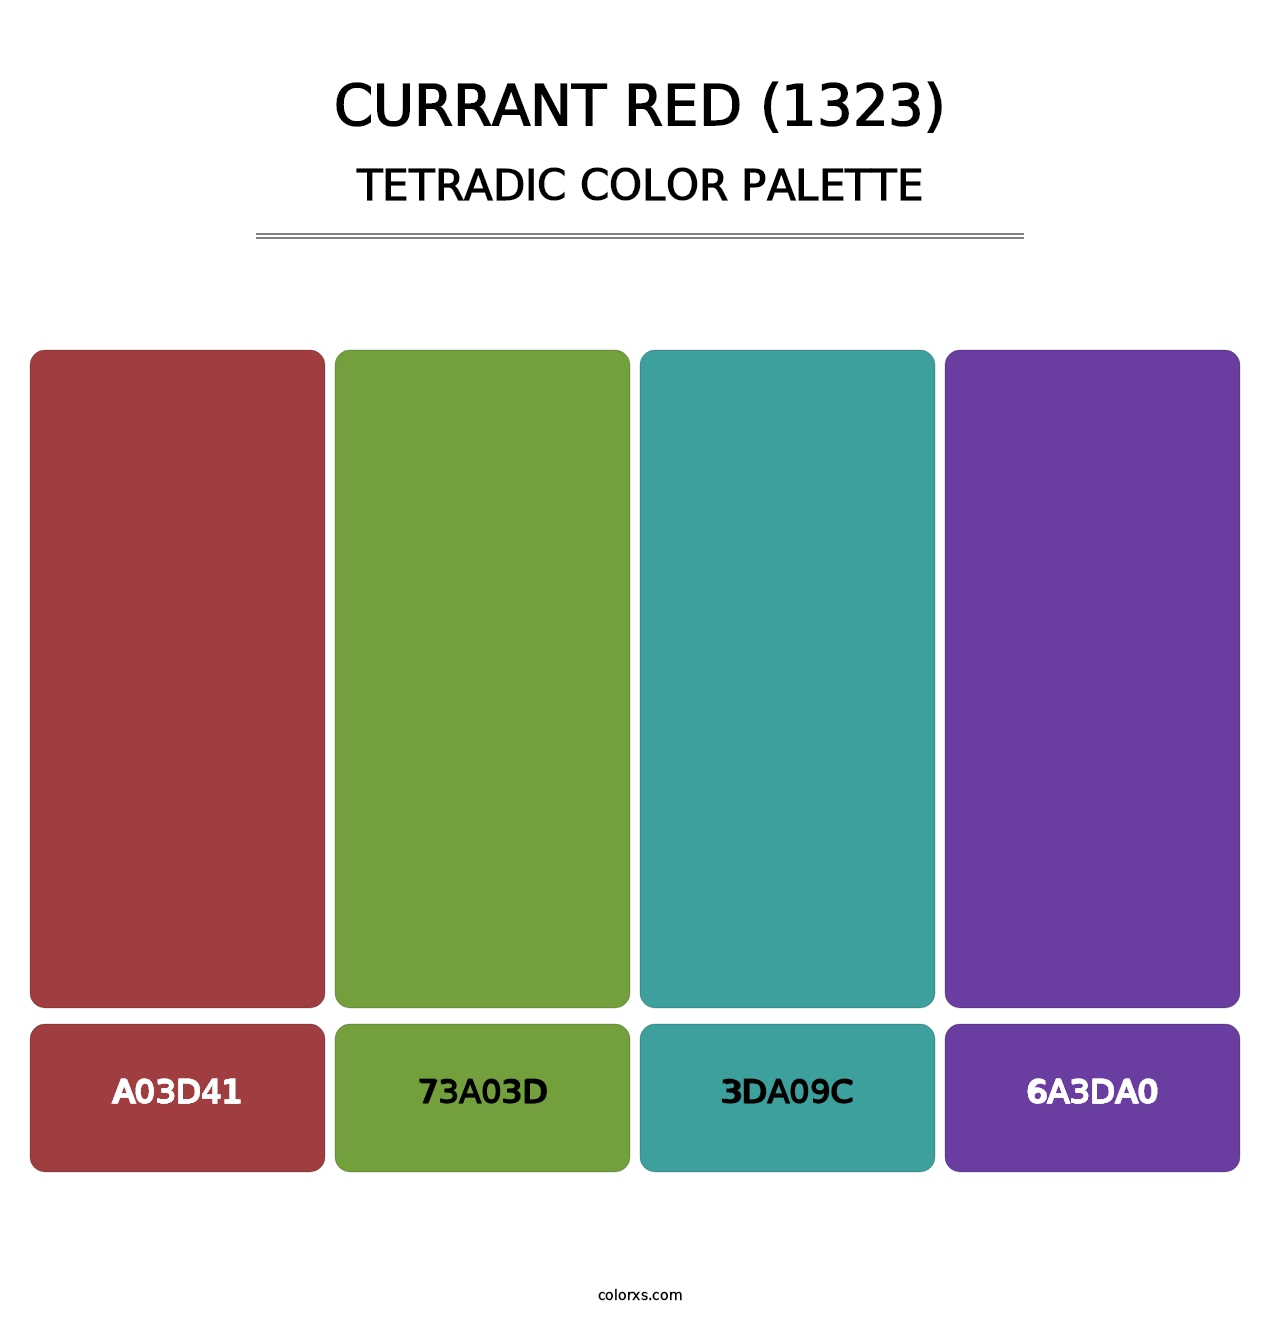 Currant Red (1323) - Tetradic Color Palette